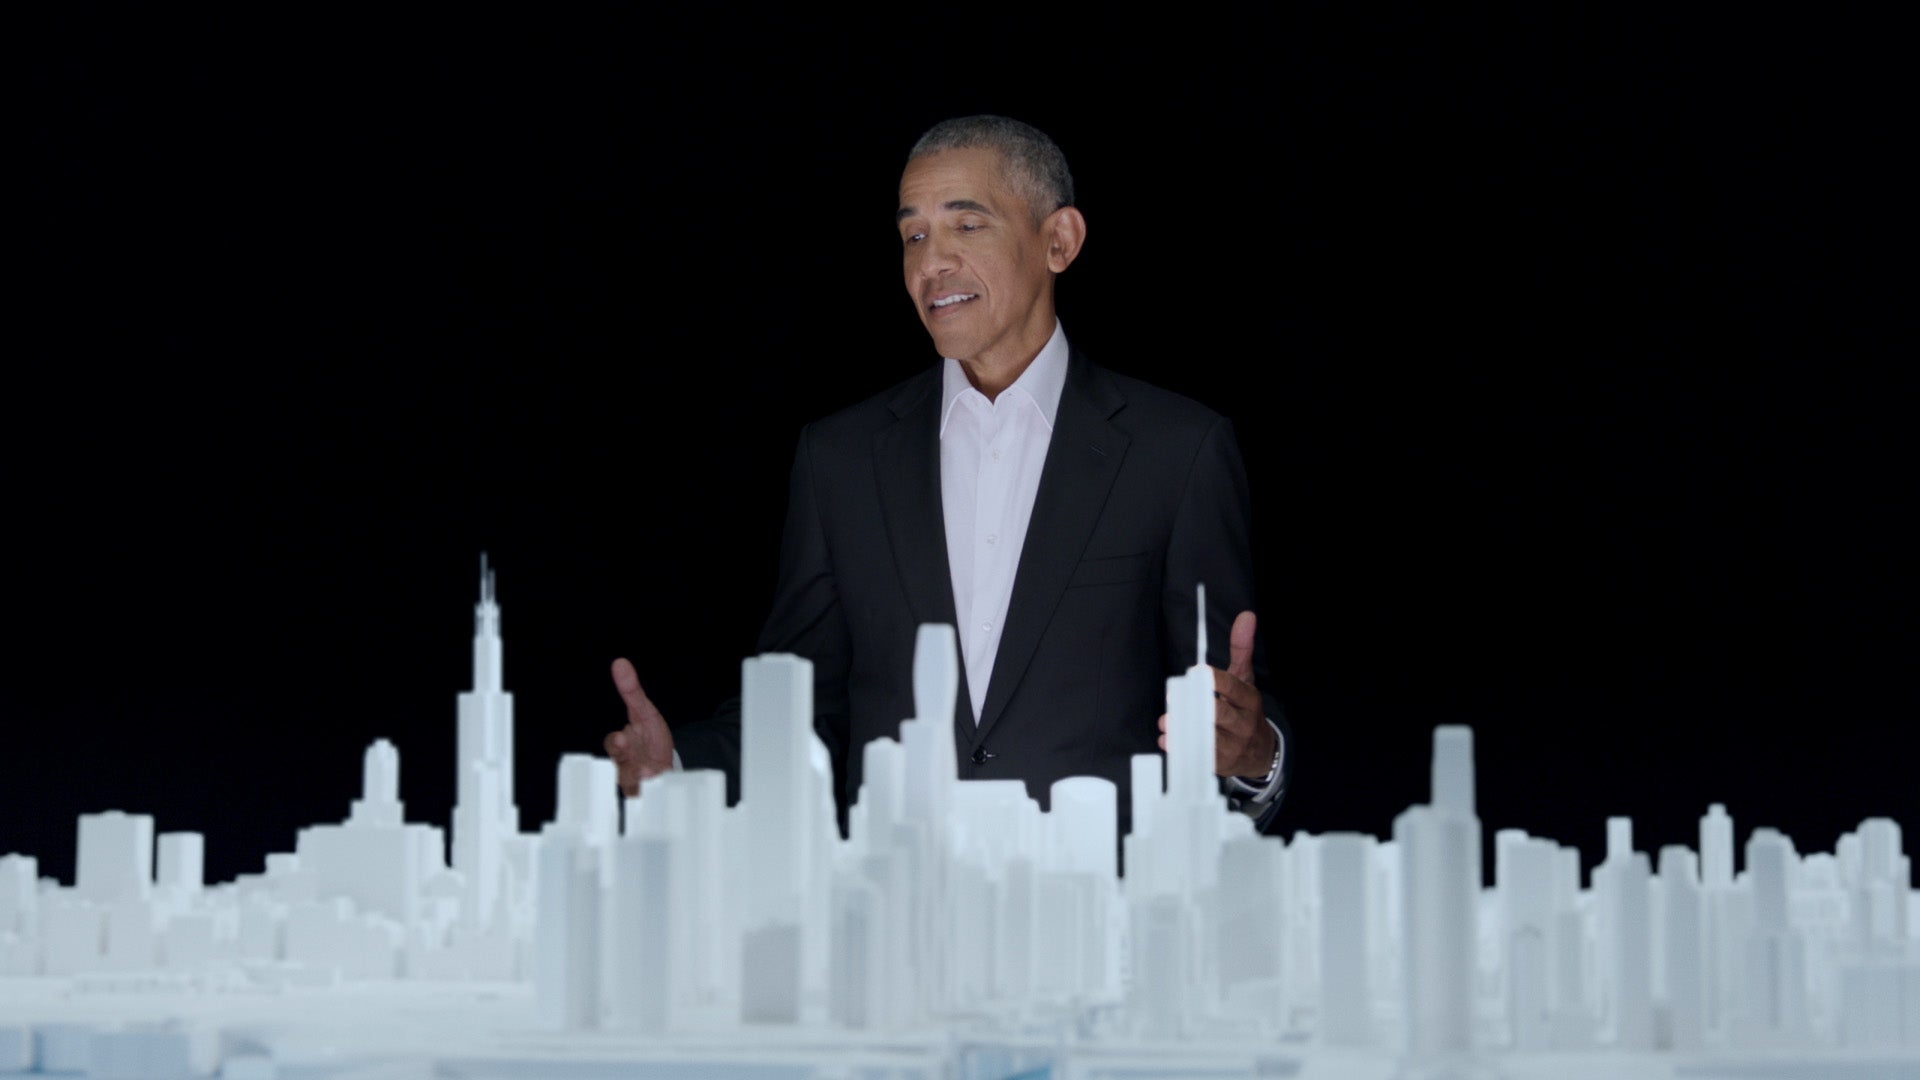 Barack Obama with Microscape's 15 foot diameter circular model of Chicago